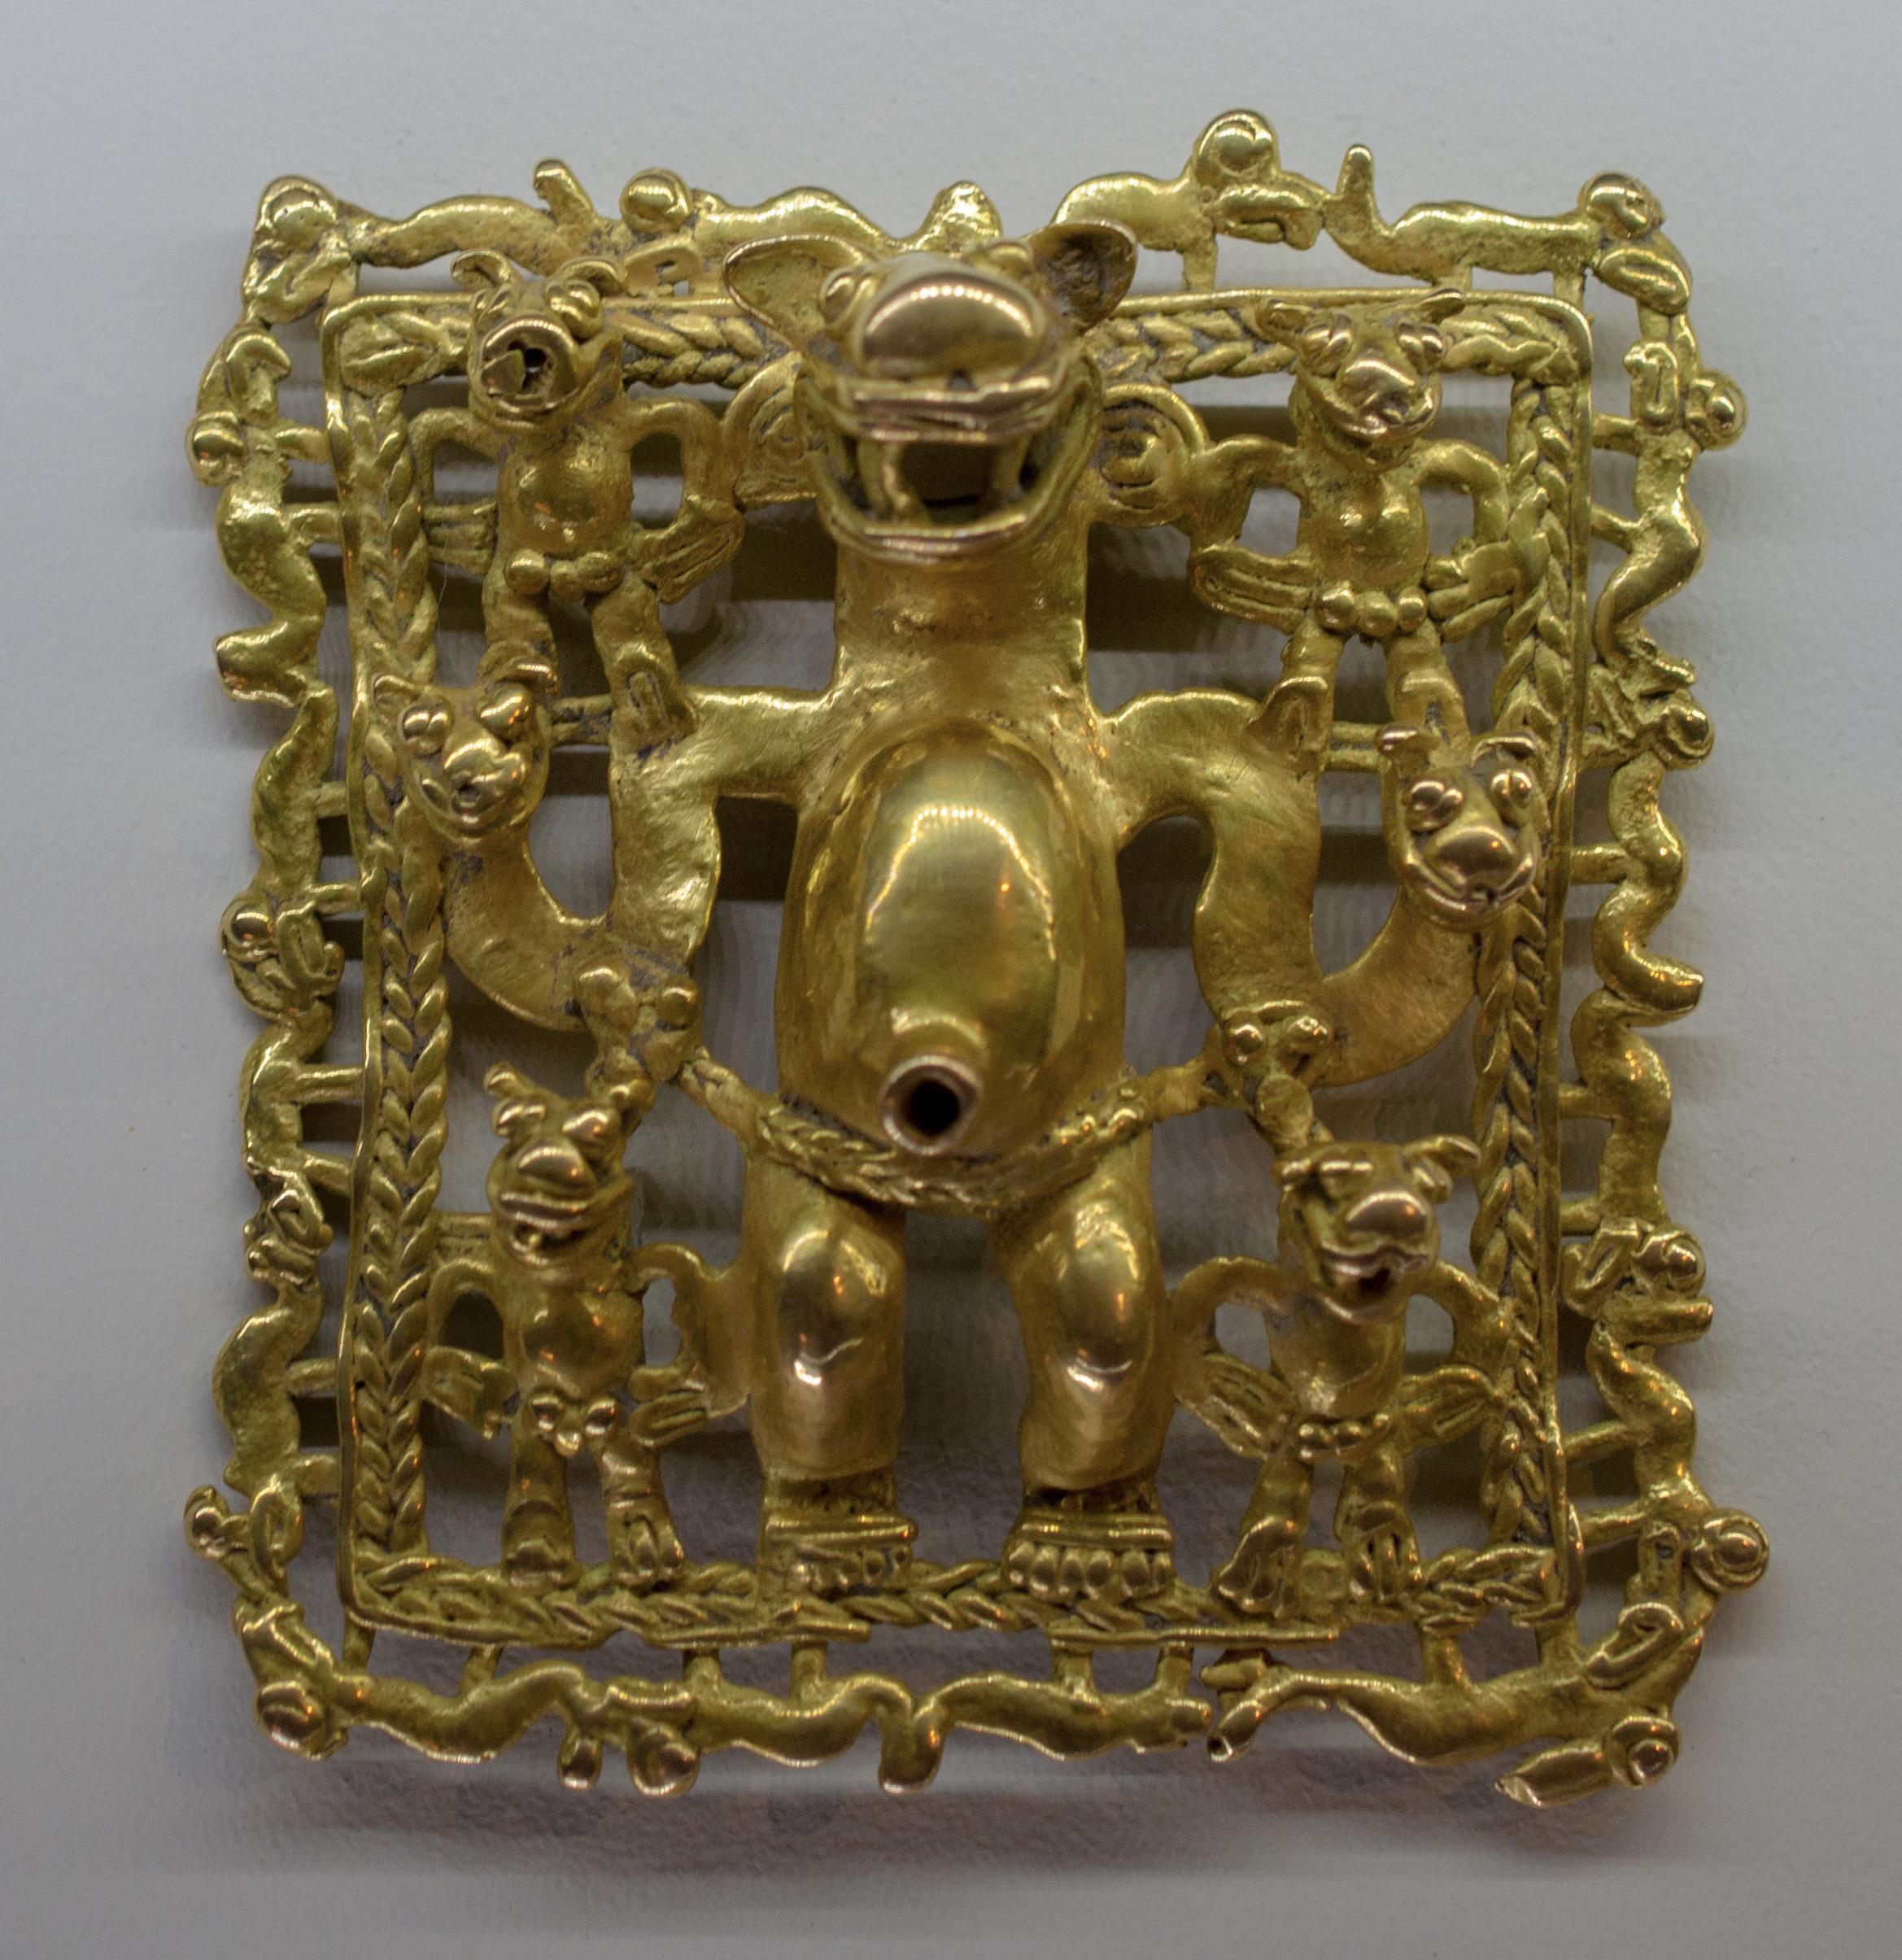 Gold artifact about the size of a postage stamp. Museo Del Oro, Costa Rica.jpg